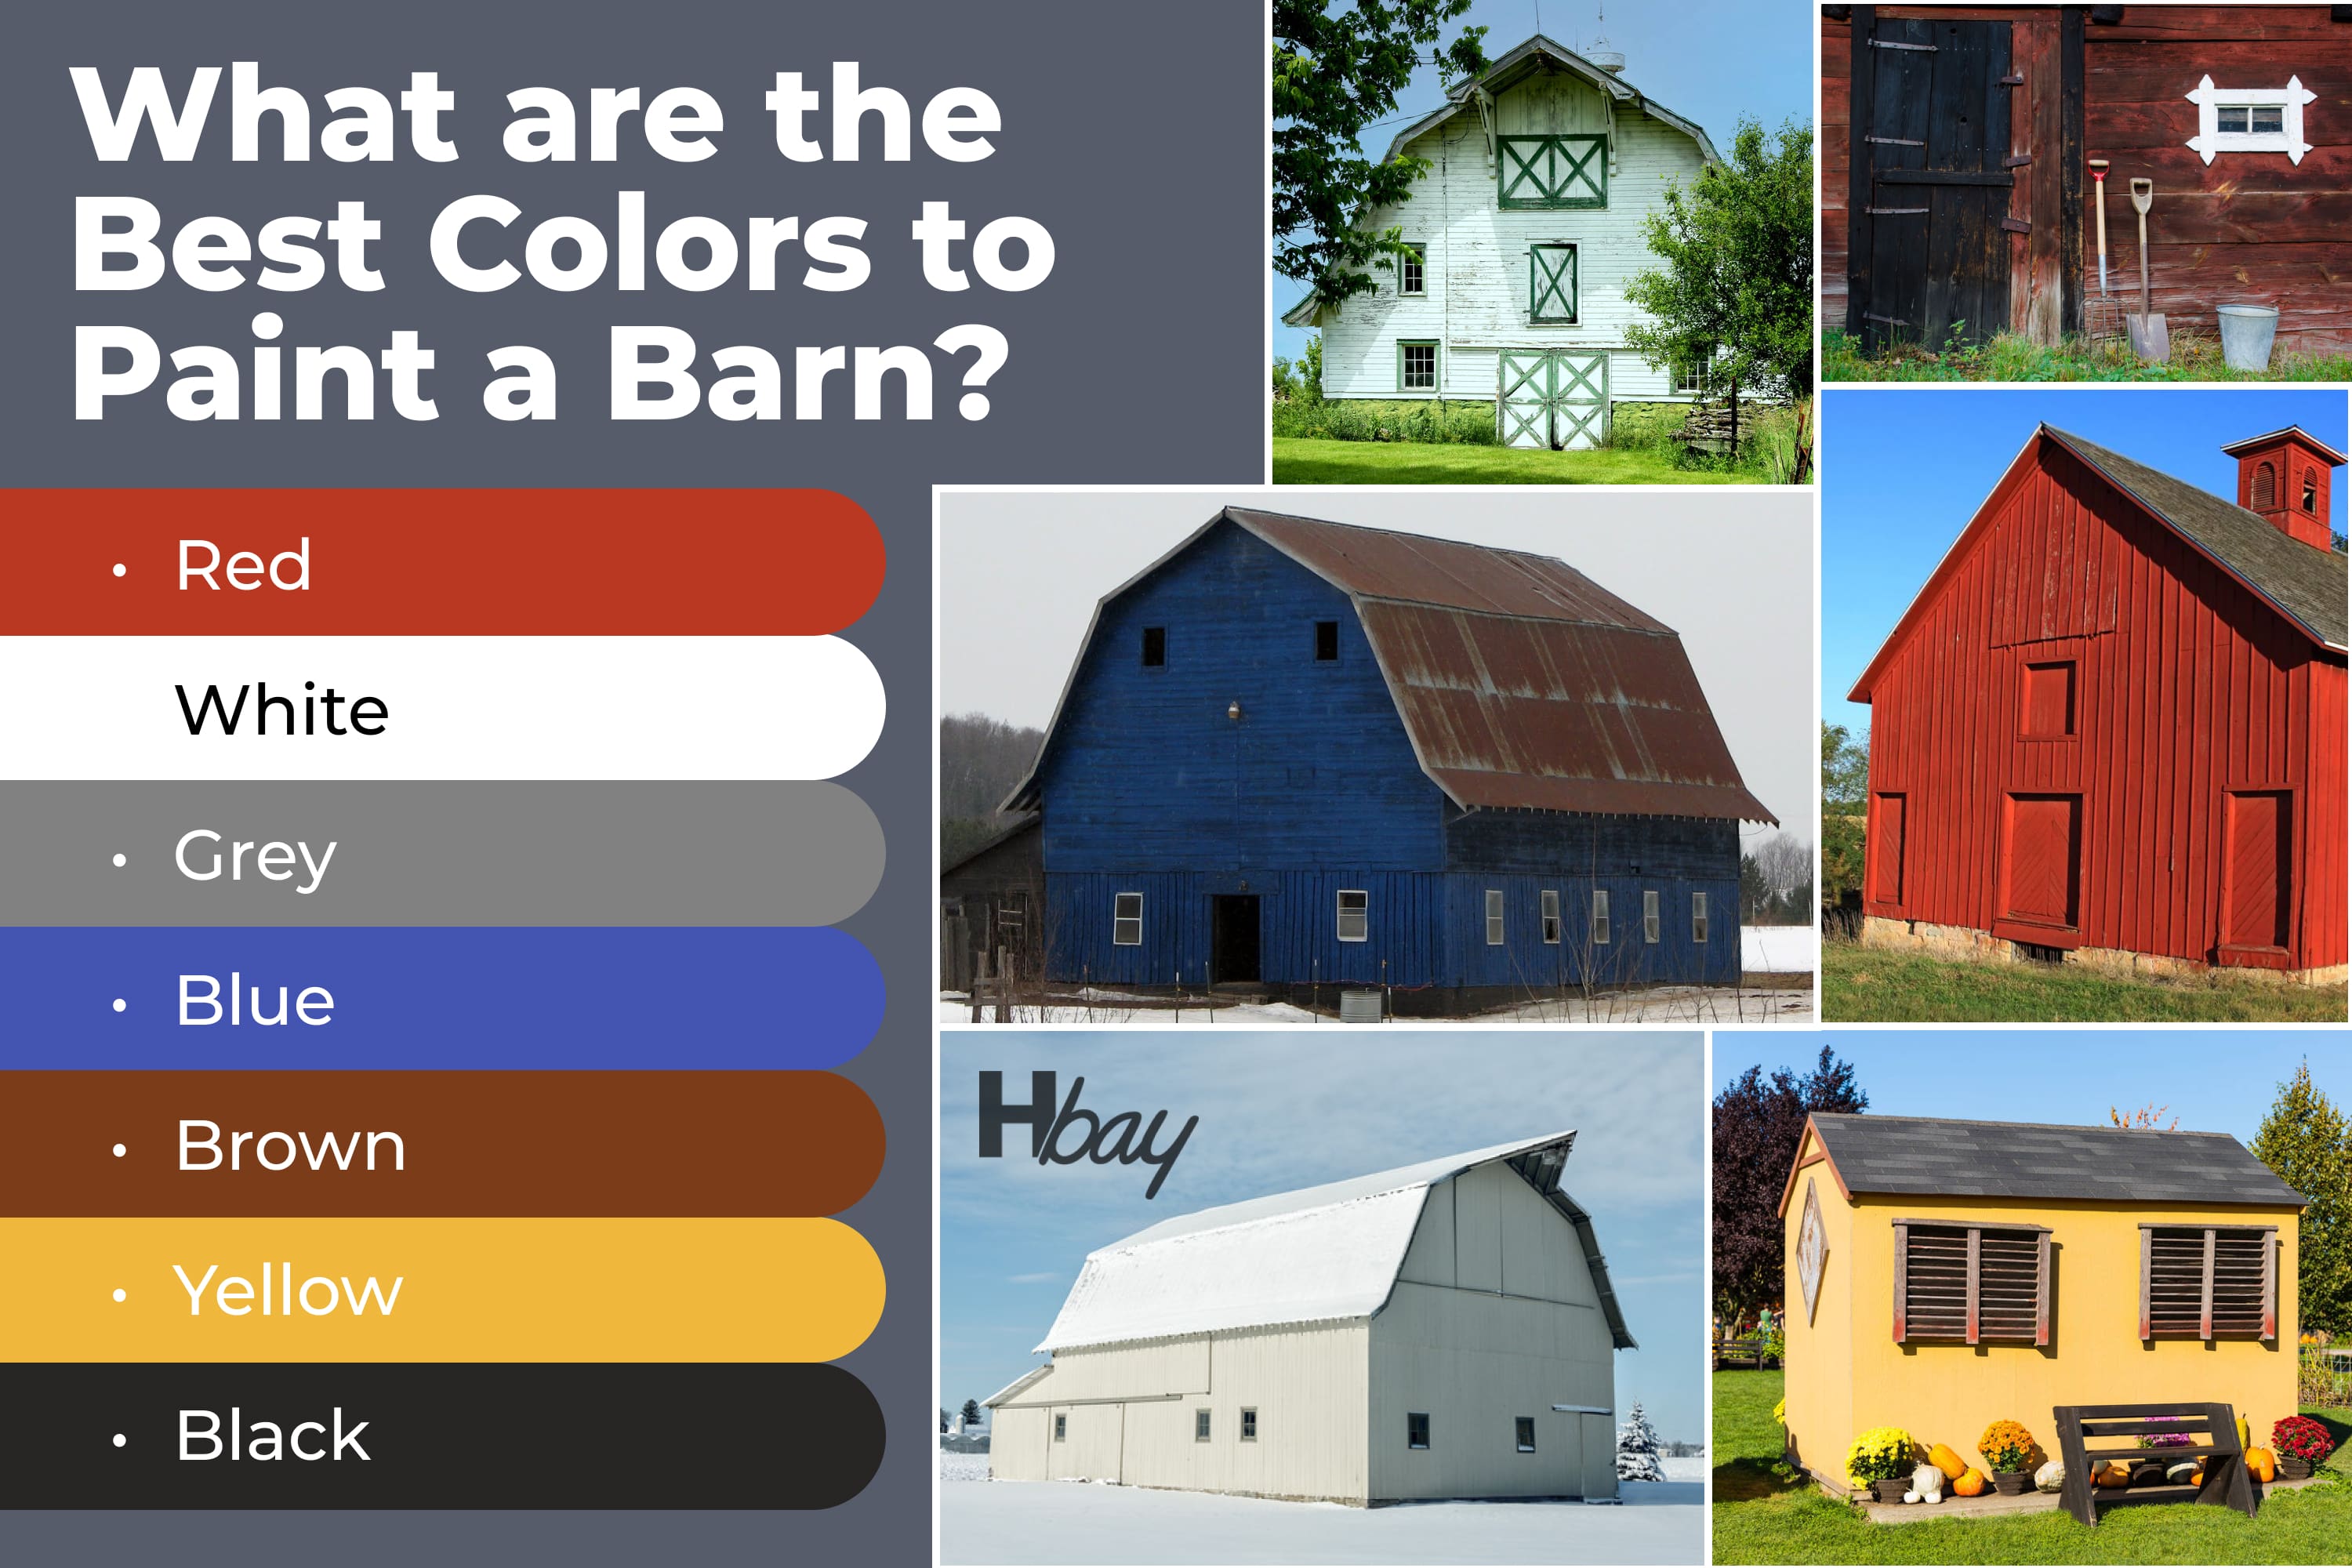 What are the best colors to paint a barn